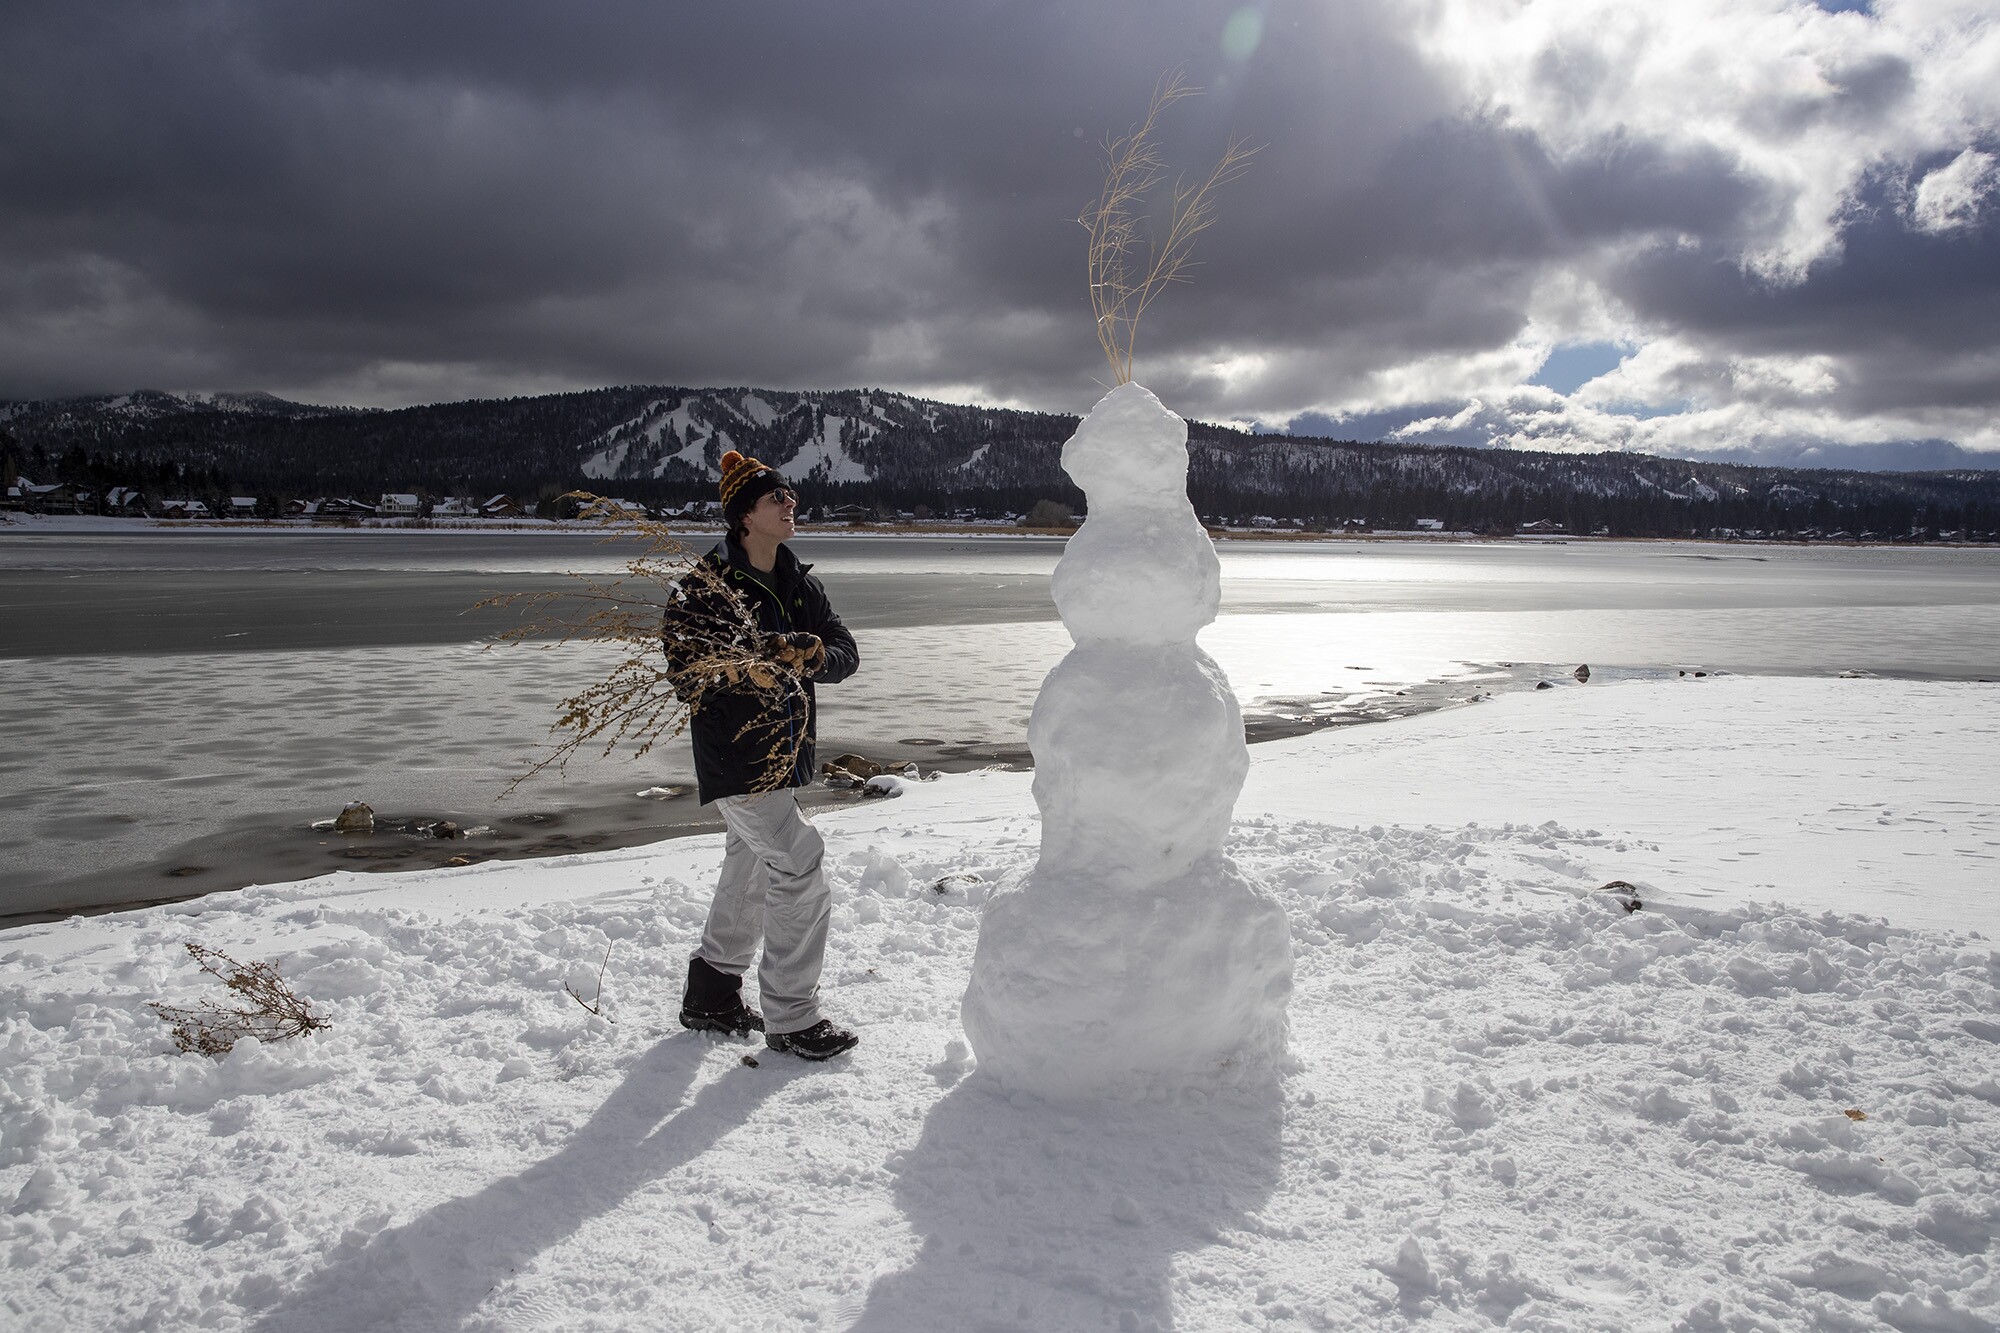 Moorpark resident Matteo Jackson, 21, puts the finishing touches on a  snowman on the beach Tuesday in Big Bear Lake.